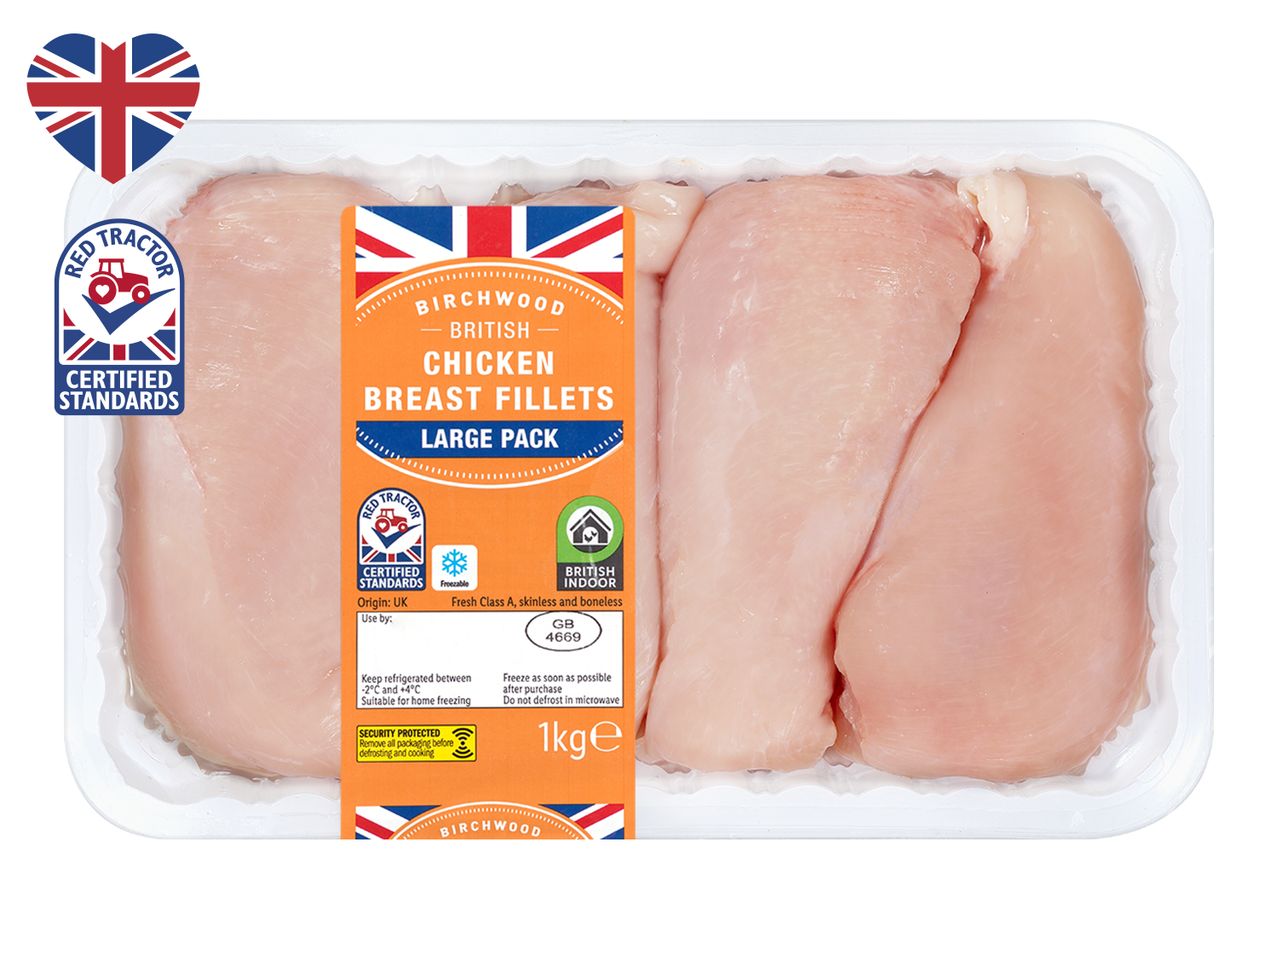 Go to full screen view: Birchwood Chicken Breast Fillets - Image 1